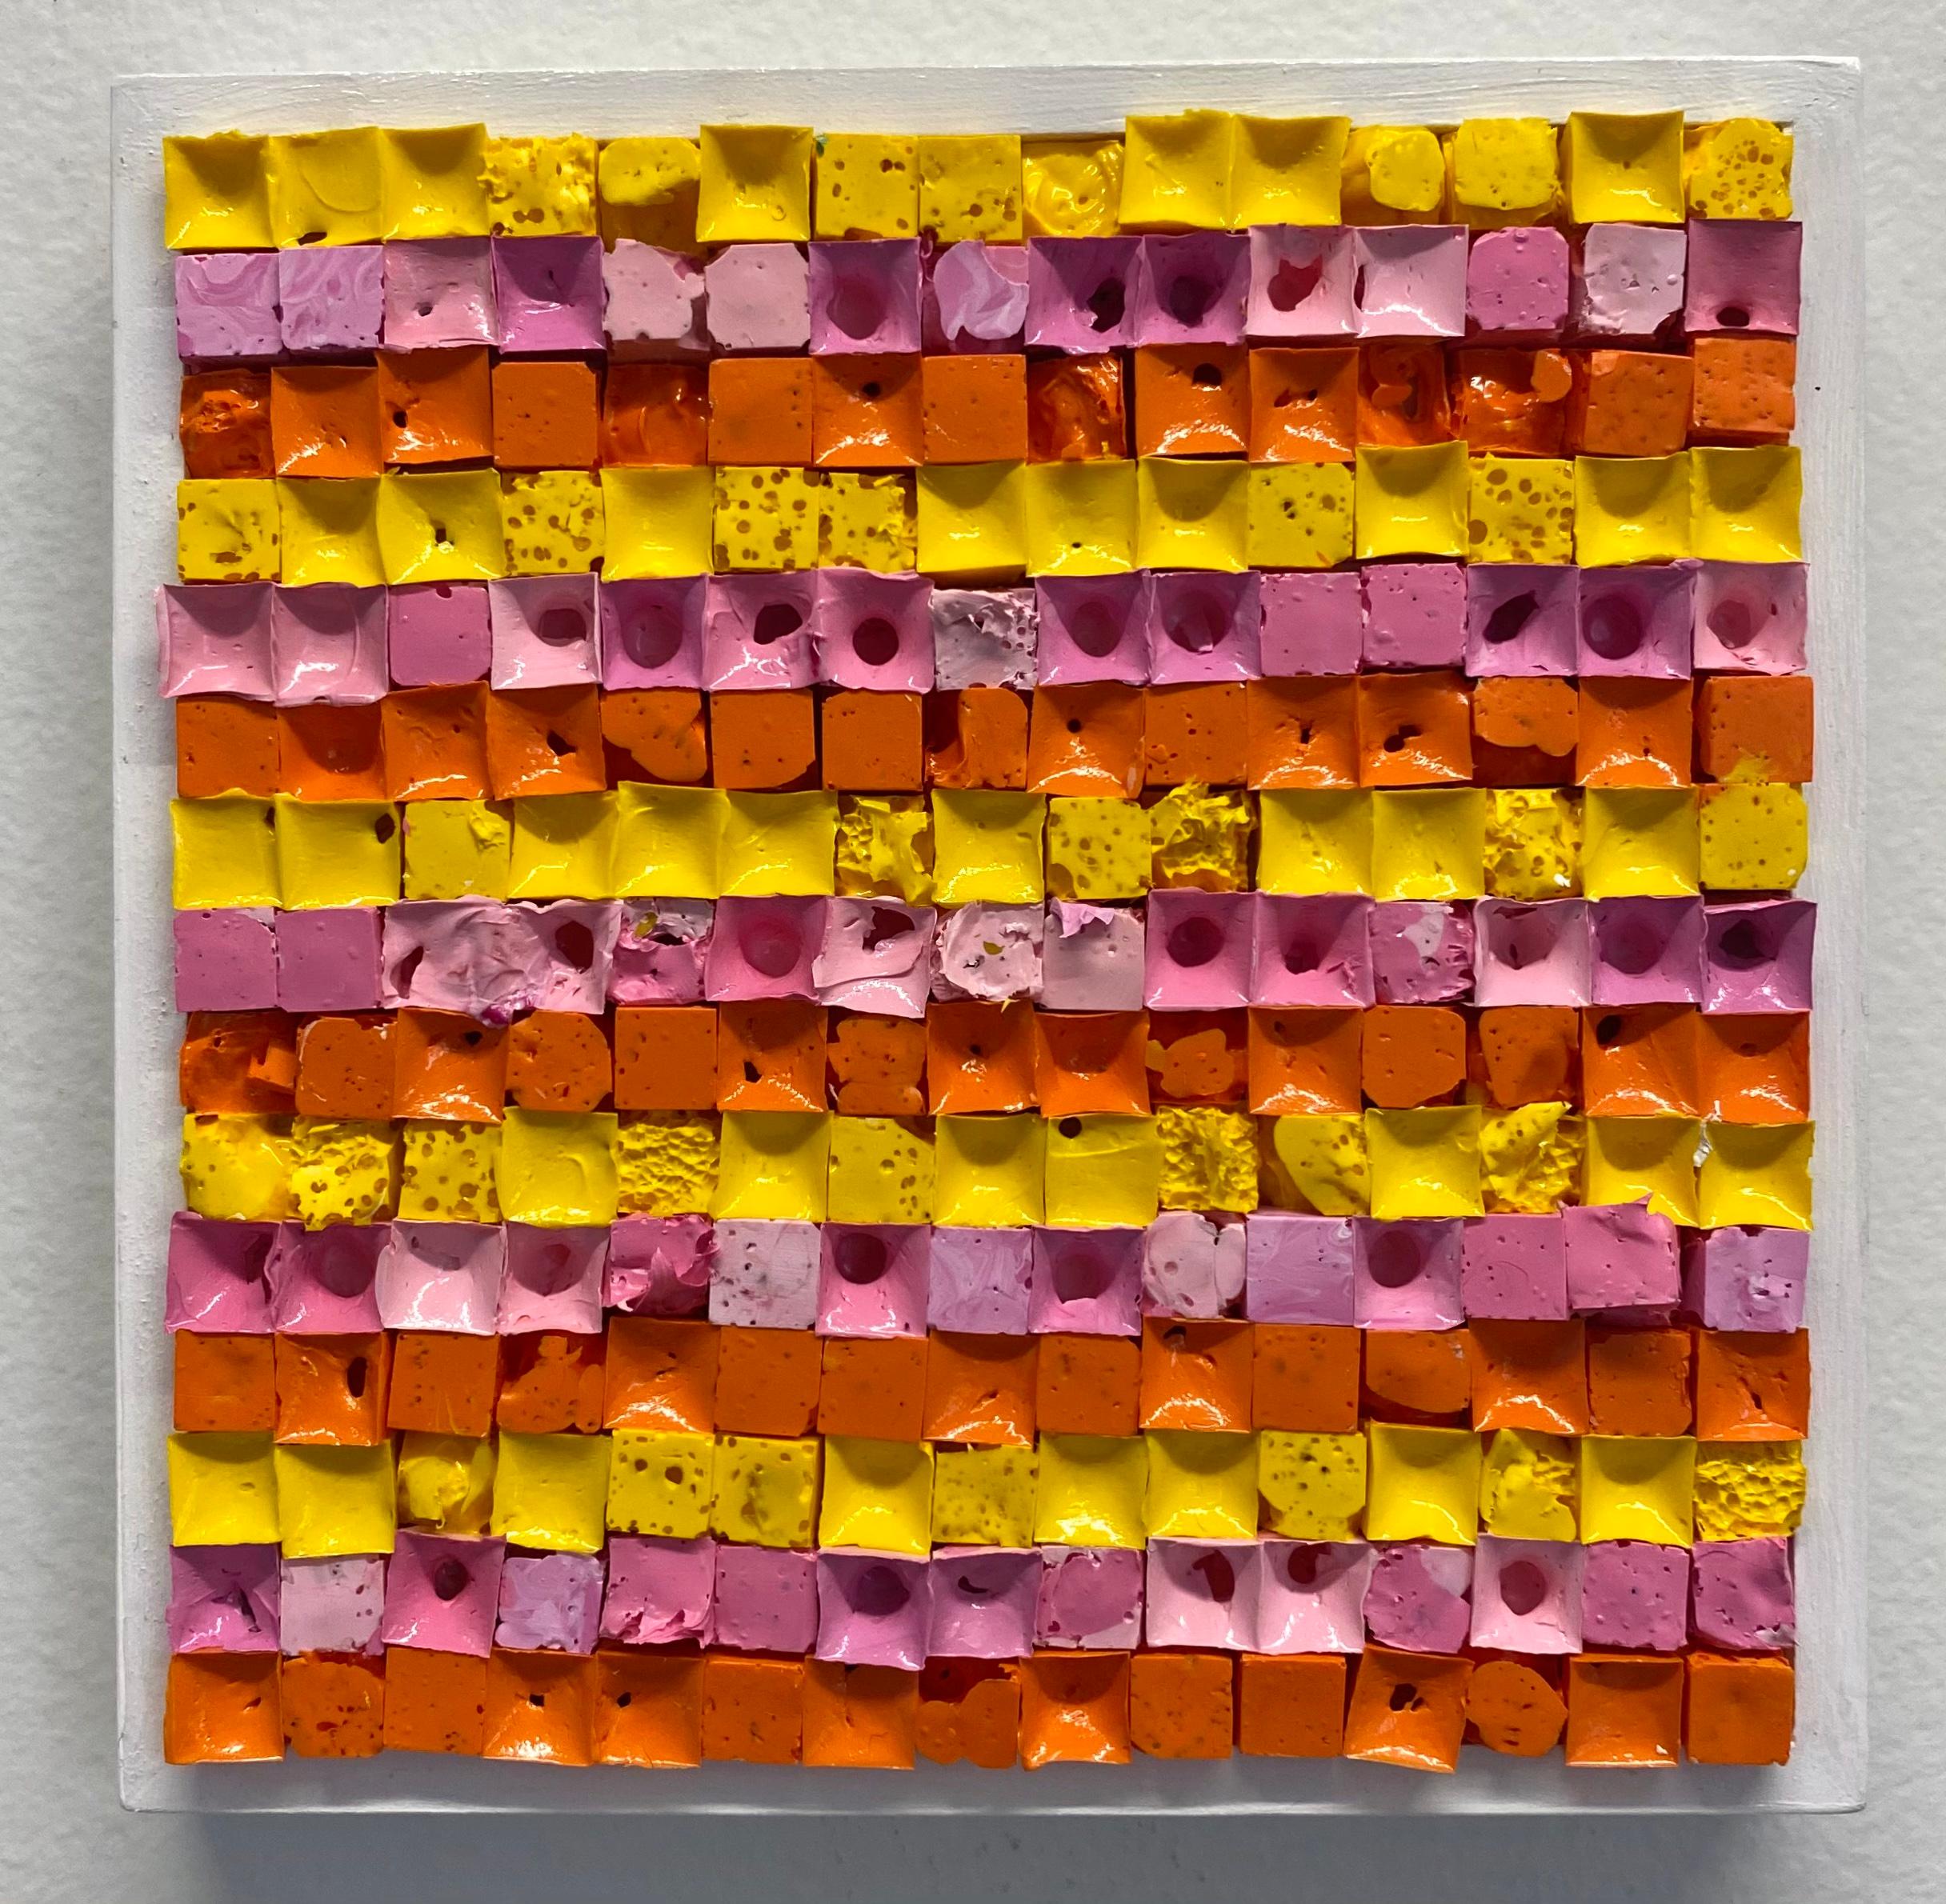 Natalie Harrison Abstract Sculpture - WARM SQUARE QUILT - Framed, Textured, Sculptural, Molded Acrylic Painting